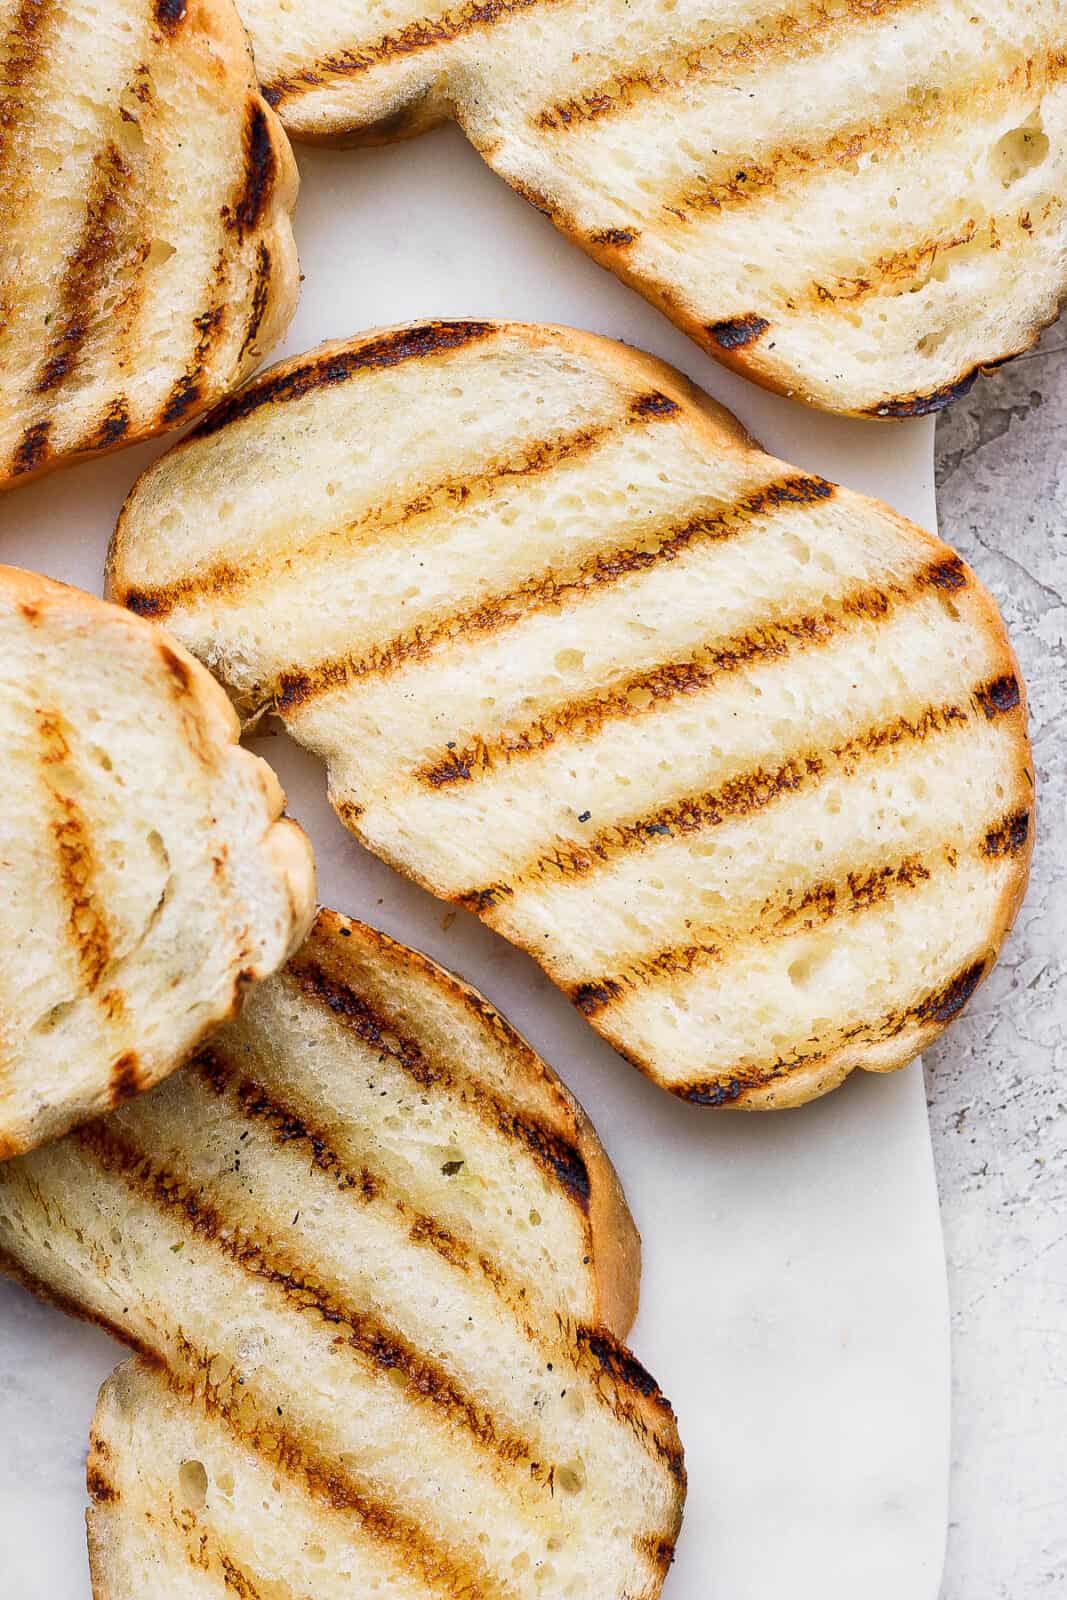 Slices of grilled bread on a plate.